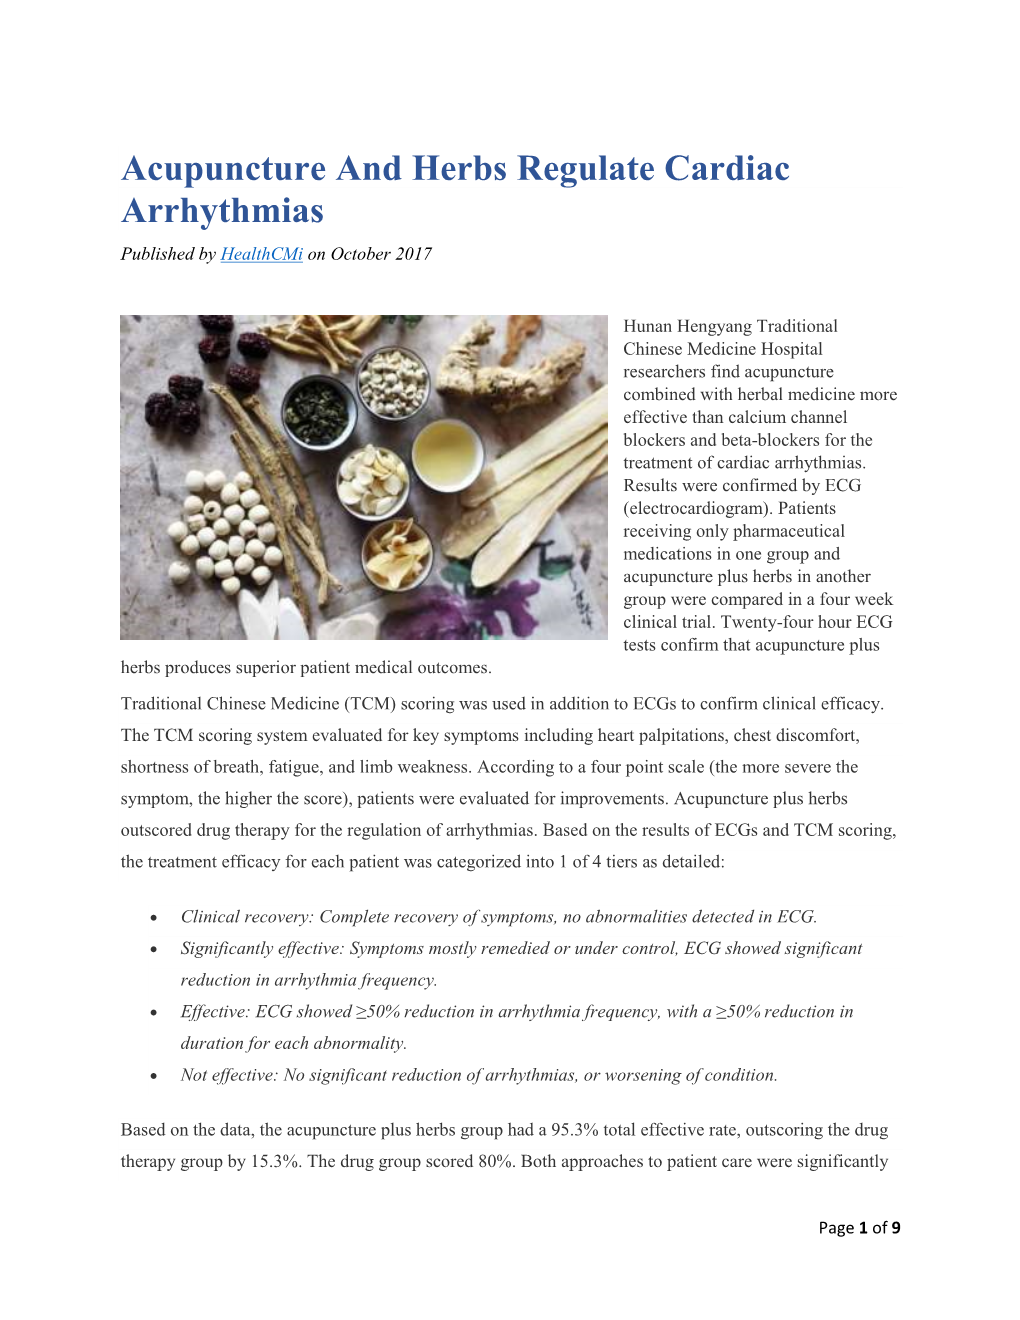 Acupuncture and Herbs Regulate Cardiac Arrhythmias Published by Healthcmi on October 2017